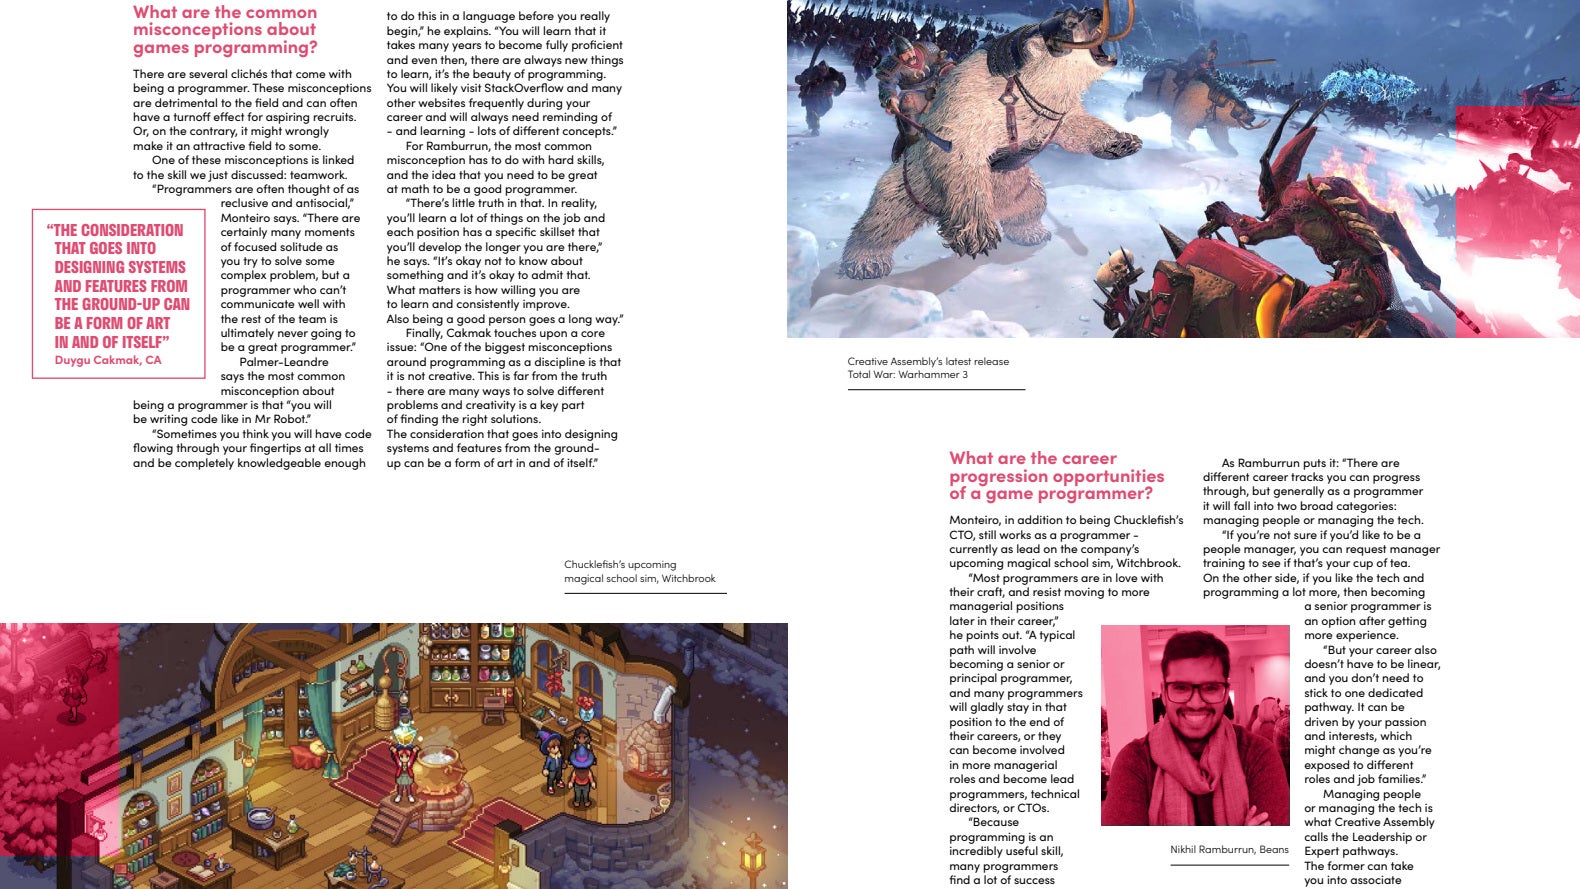 Advice on getting a job in the games industry from the GamesIndustry.biz Academy Magazine.